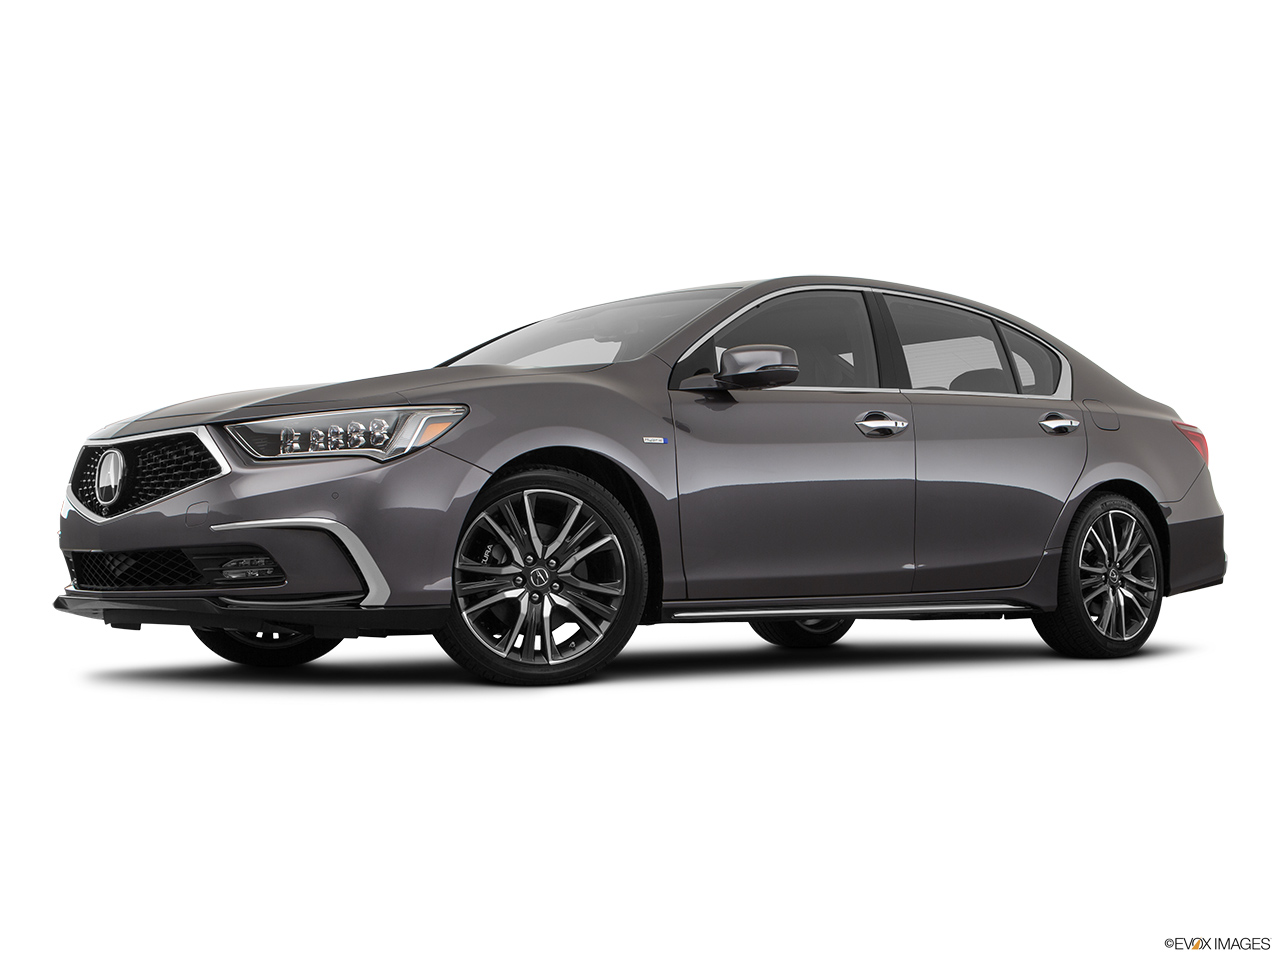 2020 Acura RLX Sport Hybrid SH-AWD Low/wide front 5/8. 